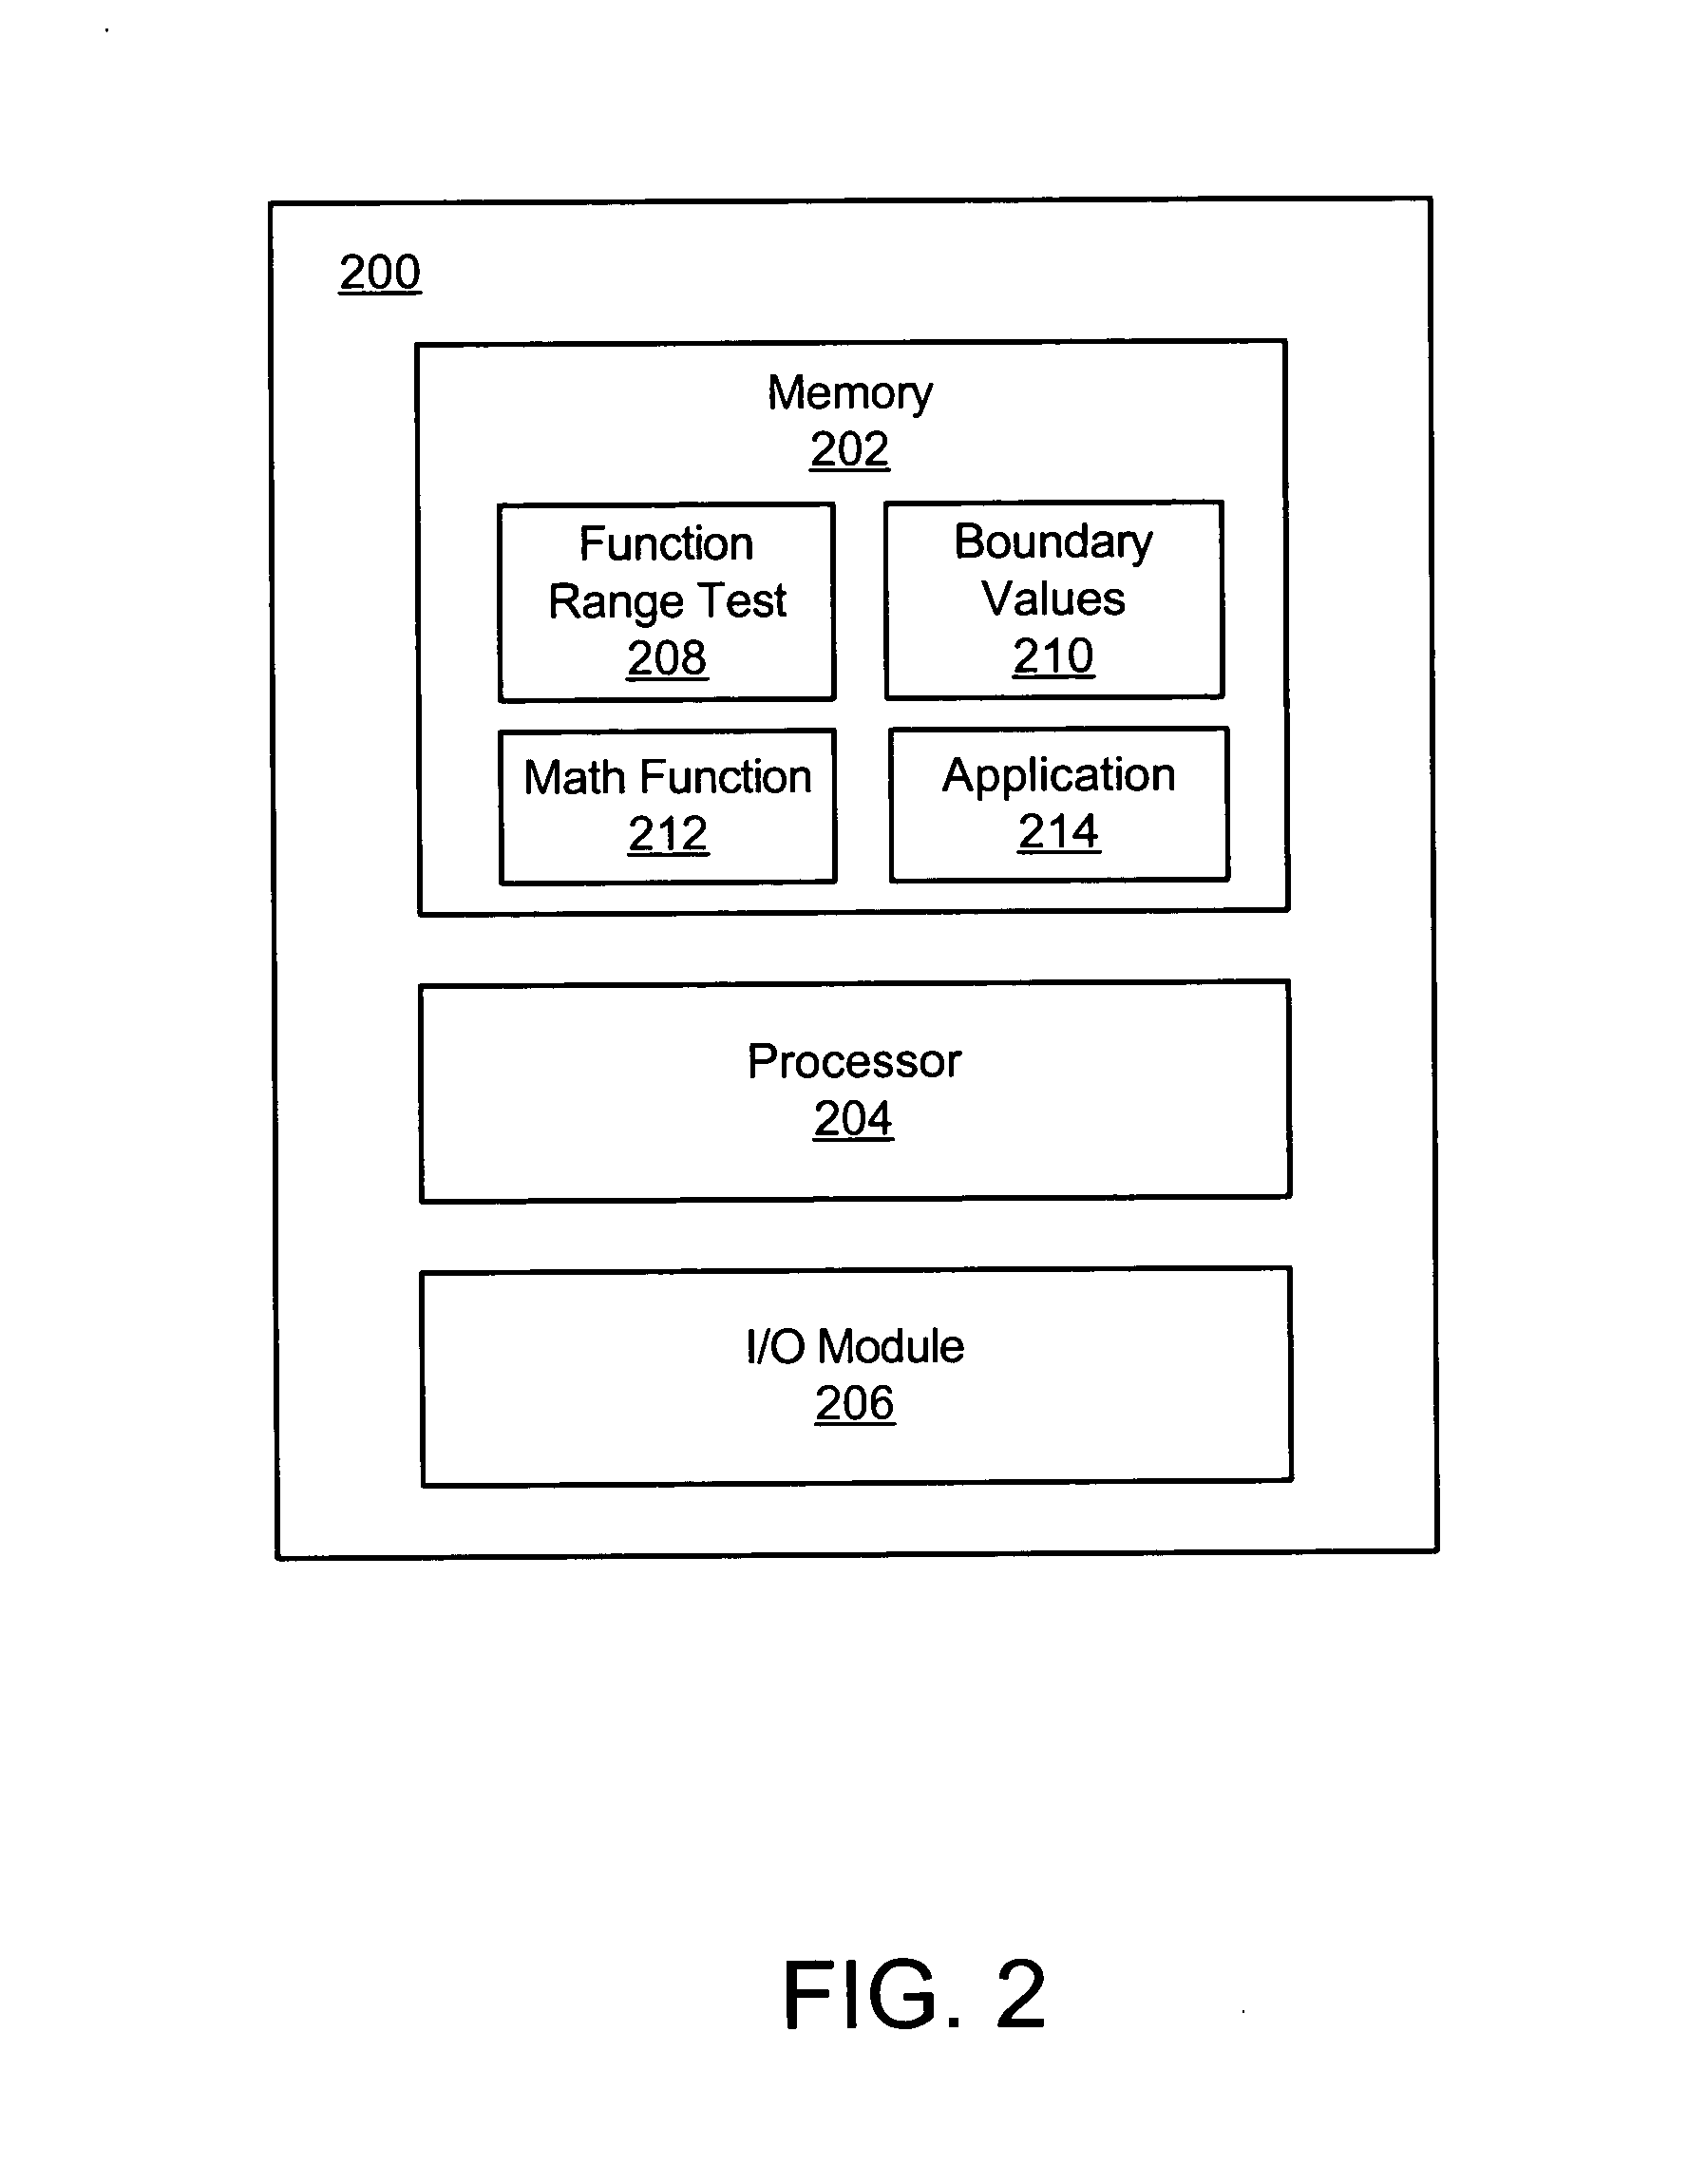 Apparatus, system, and method for efficient and reliable computation of results for mathematical functions